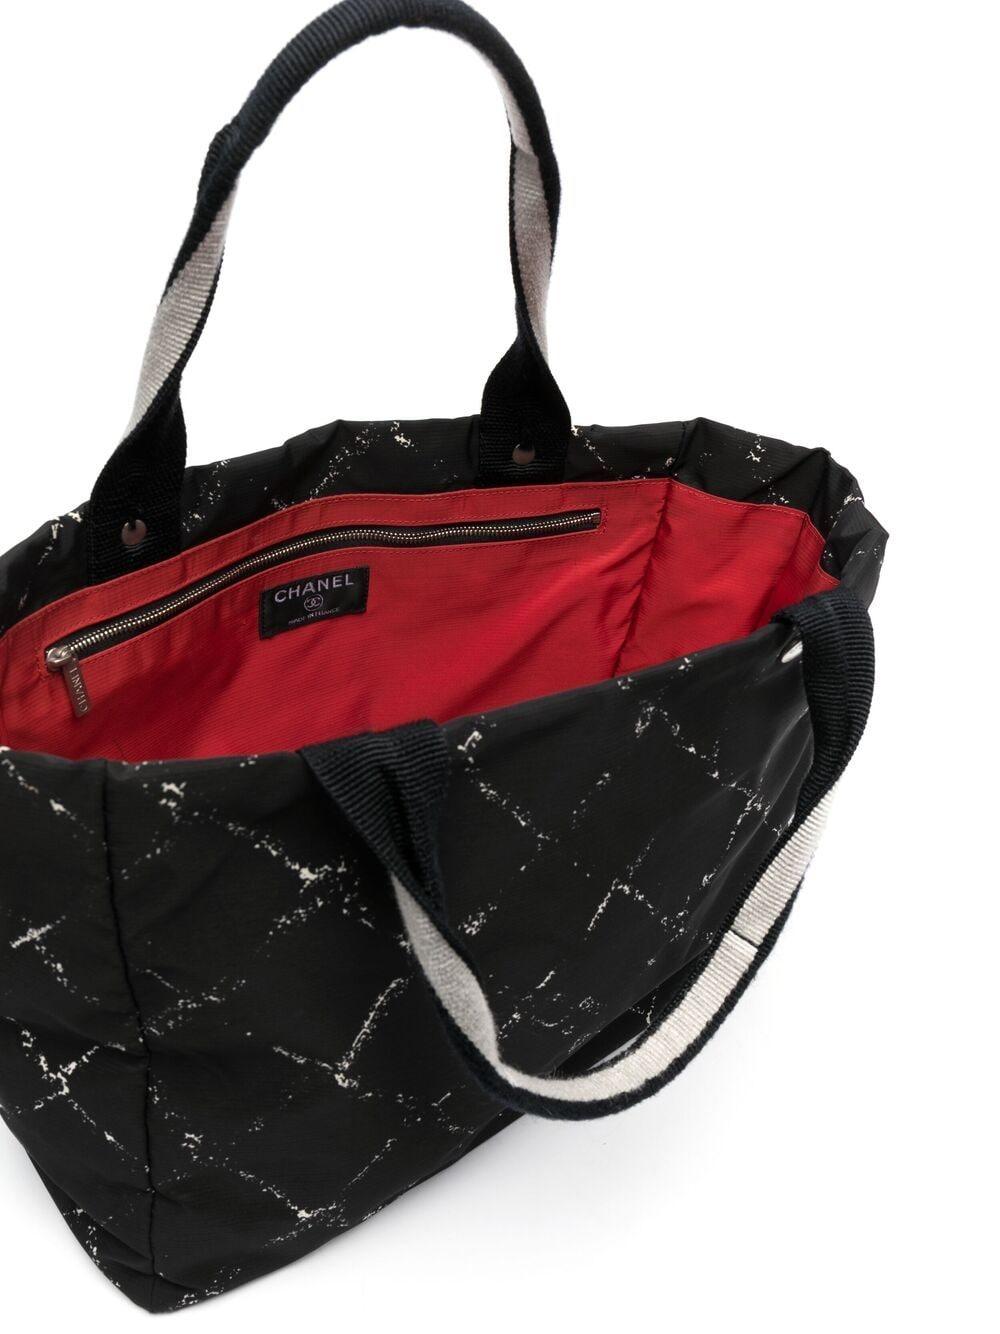 black tote with red lining